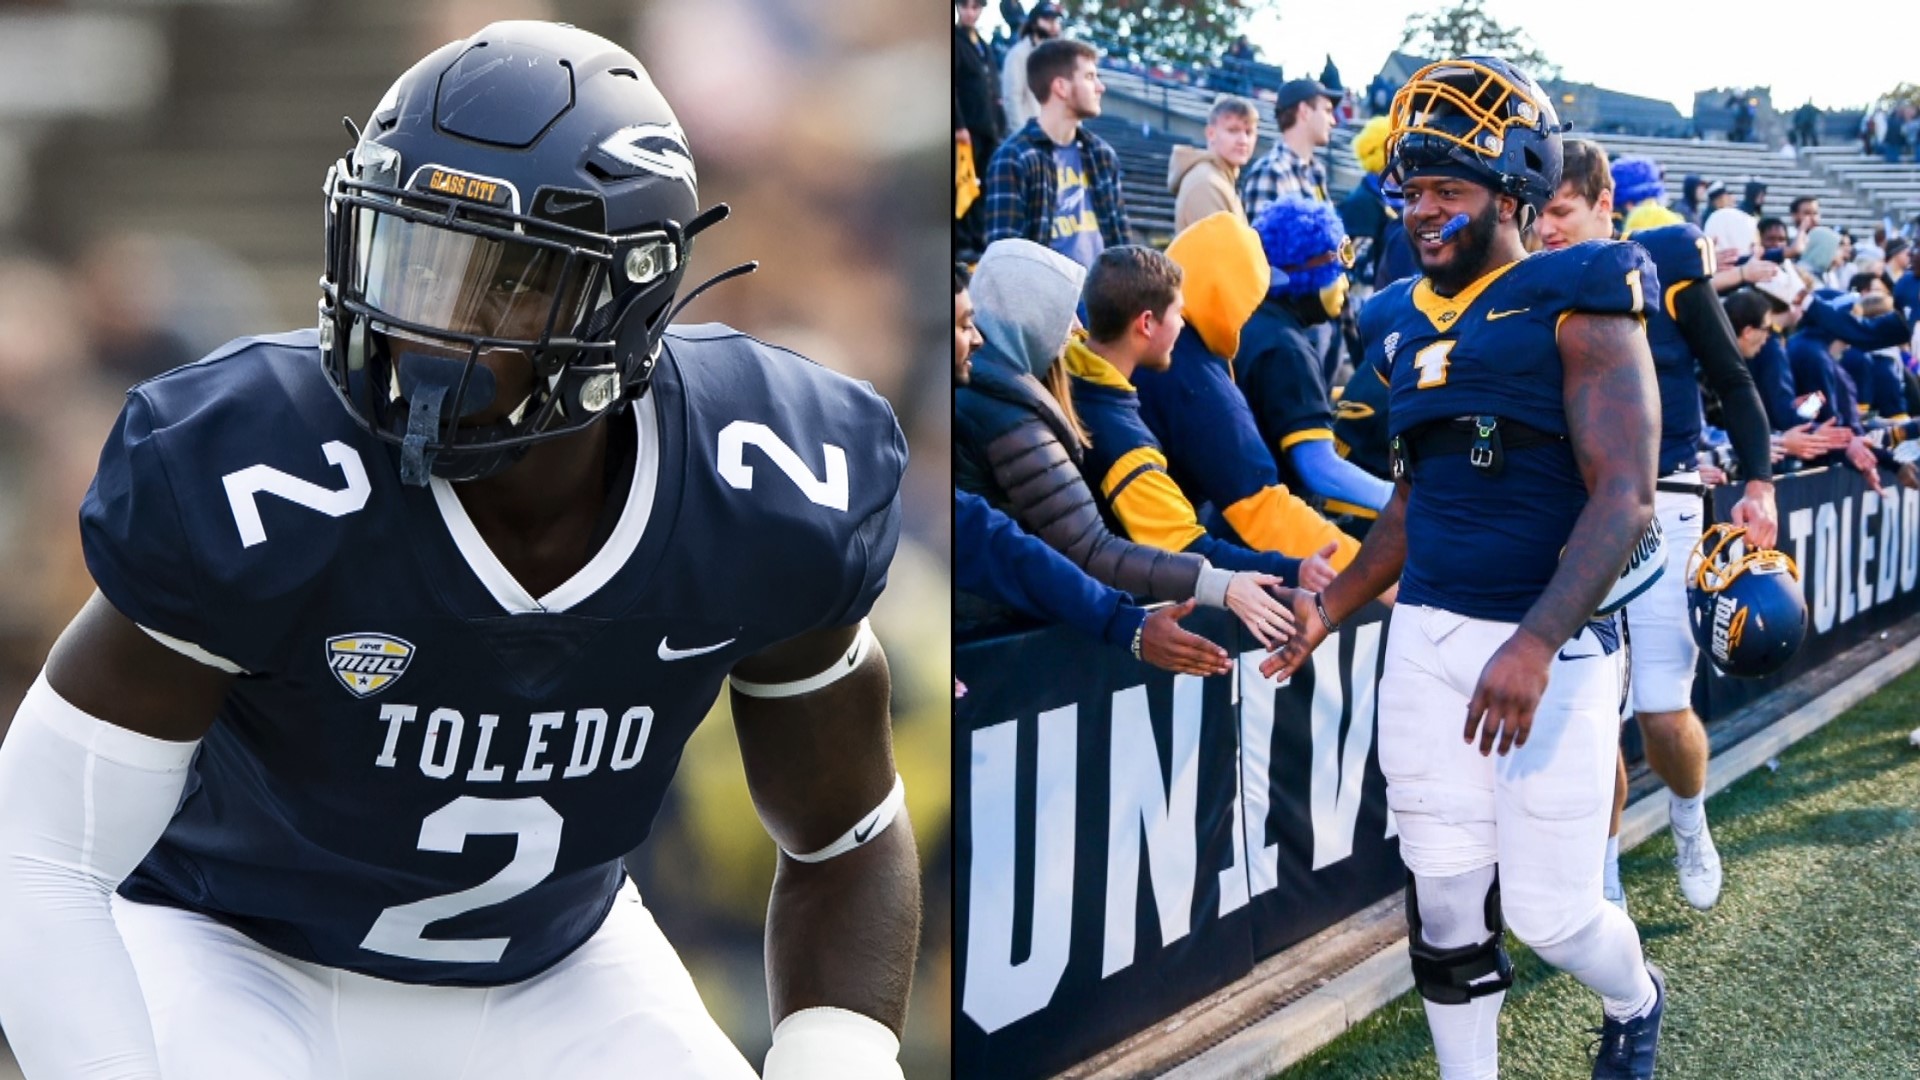 Dyontae and Desjuan Johnson are standouts for the Rockets, but their bond goes well beyond their time at the University of Toledo on the football field.